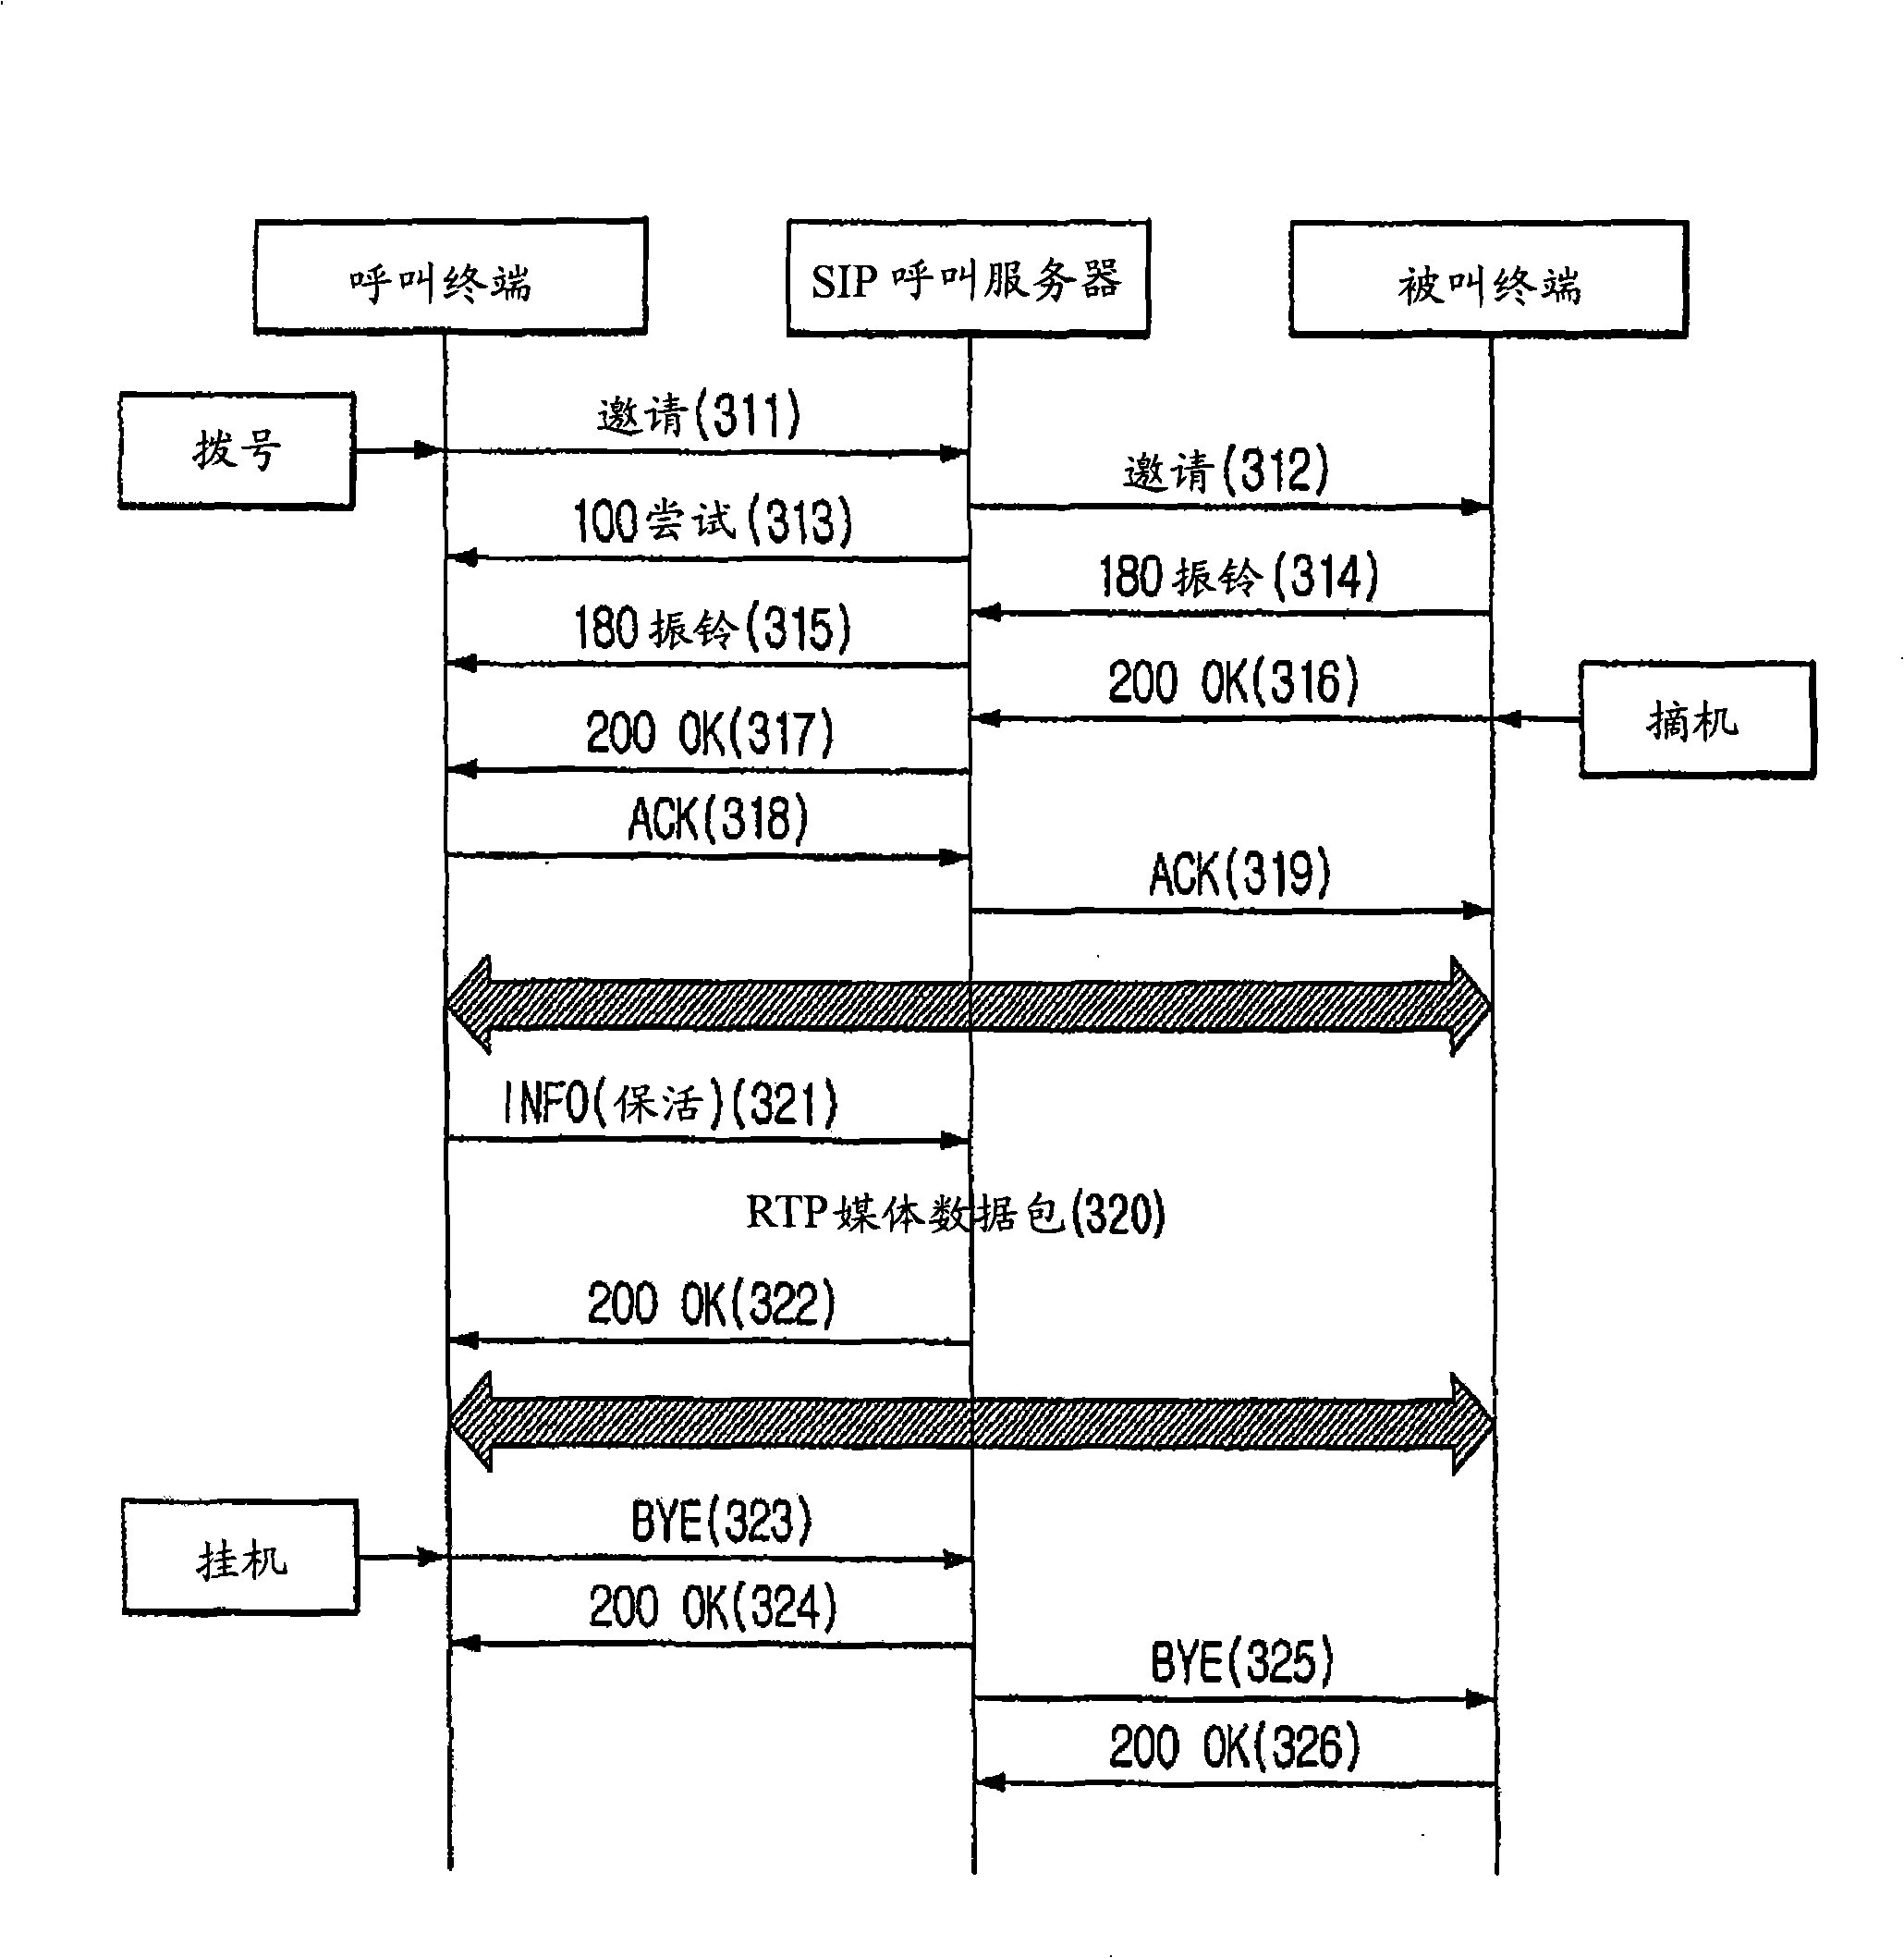 Method for obtaining packet billing information based on session initiation protocol